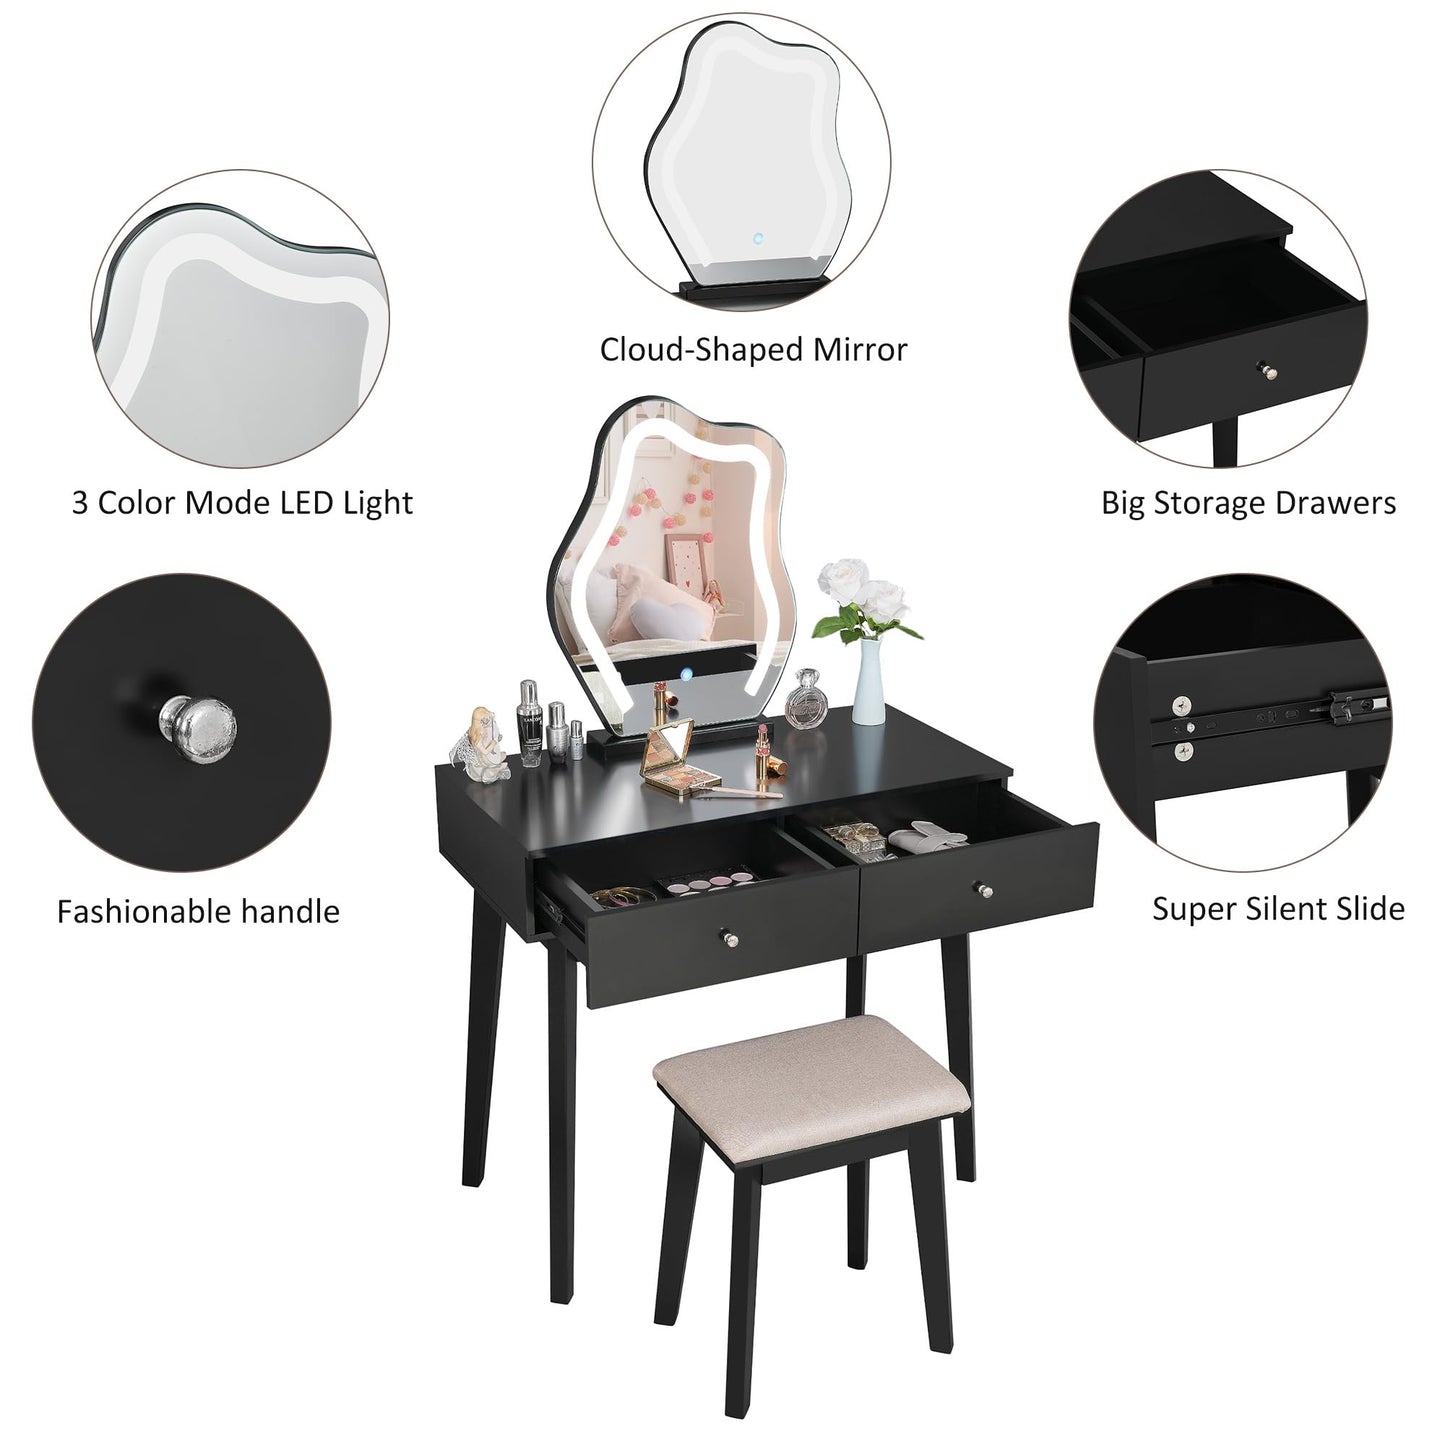 ANWBROAD Makeup Vanity Desk Vanity Set with LED Lighted Mirror Makeup Vanity Table Set 3 Colors Modes Dimming Cushioned Stool Large Frameless Mirror